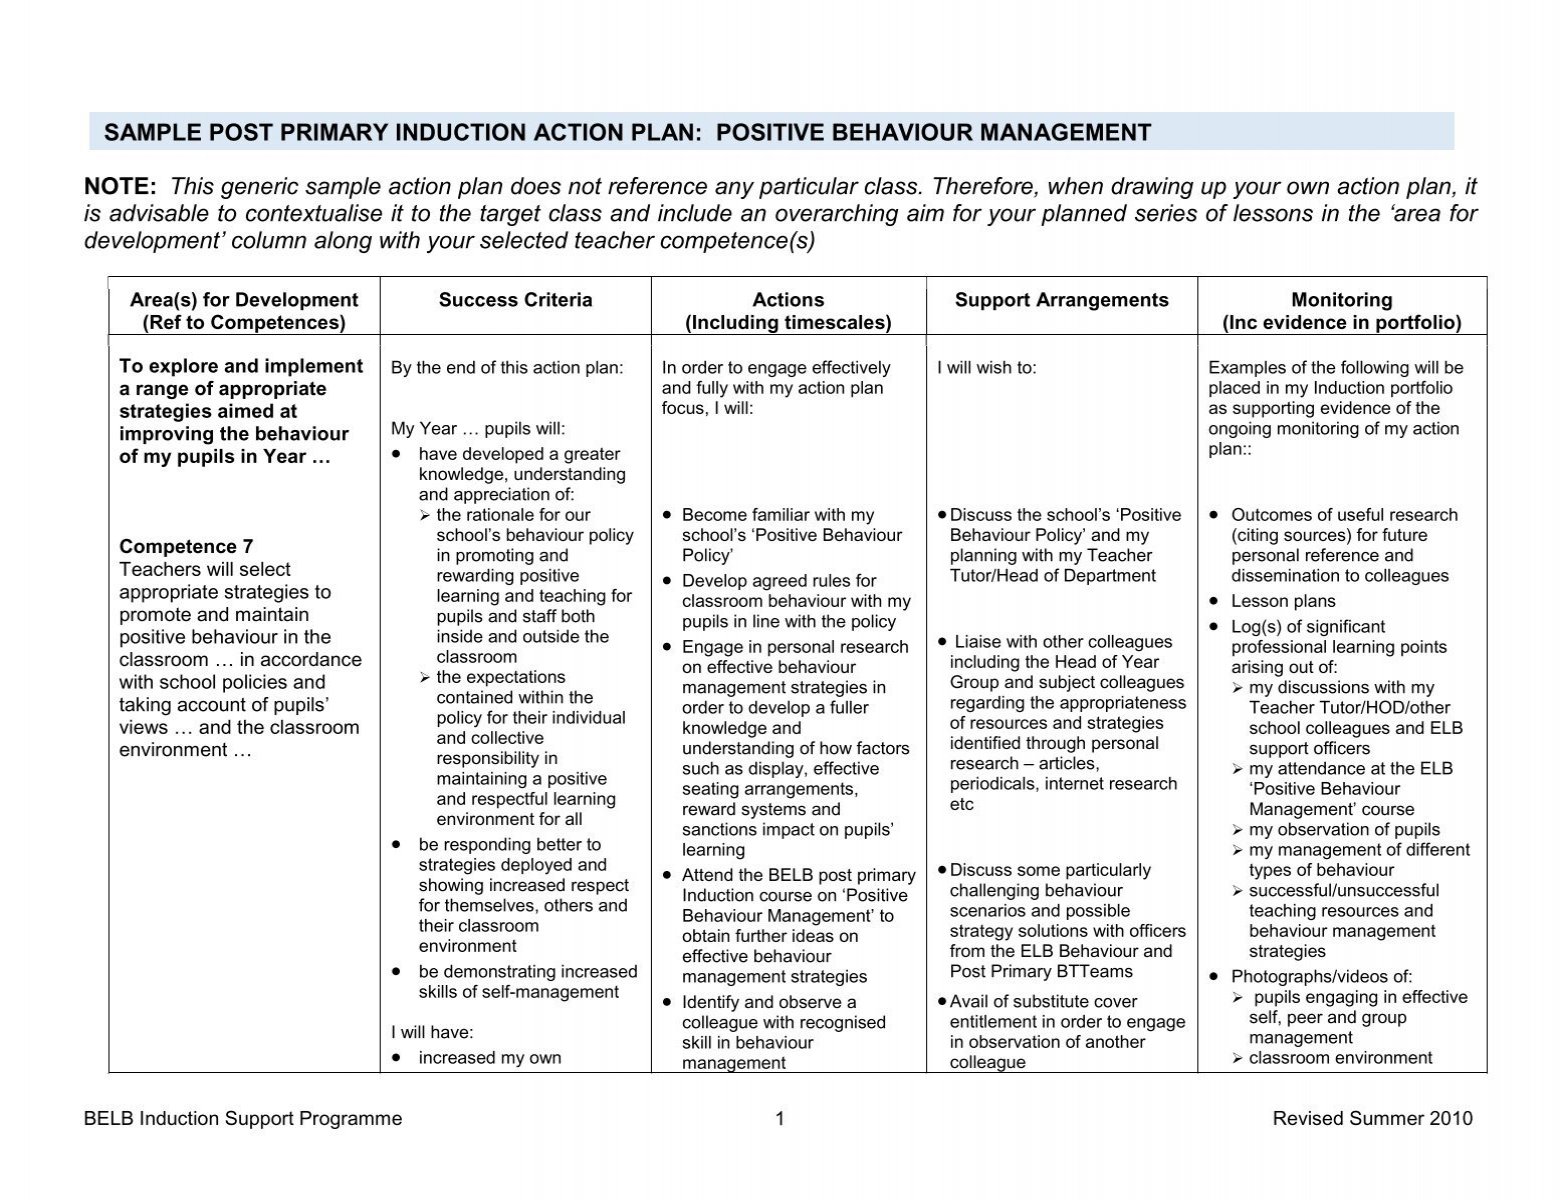 sample post primary induction action plan: positive behaviour